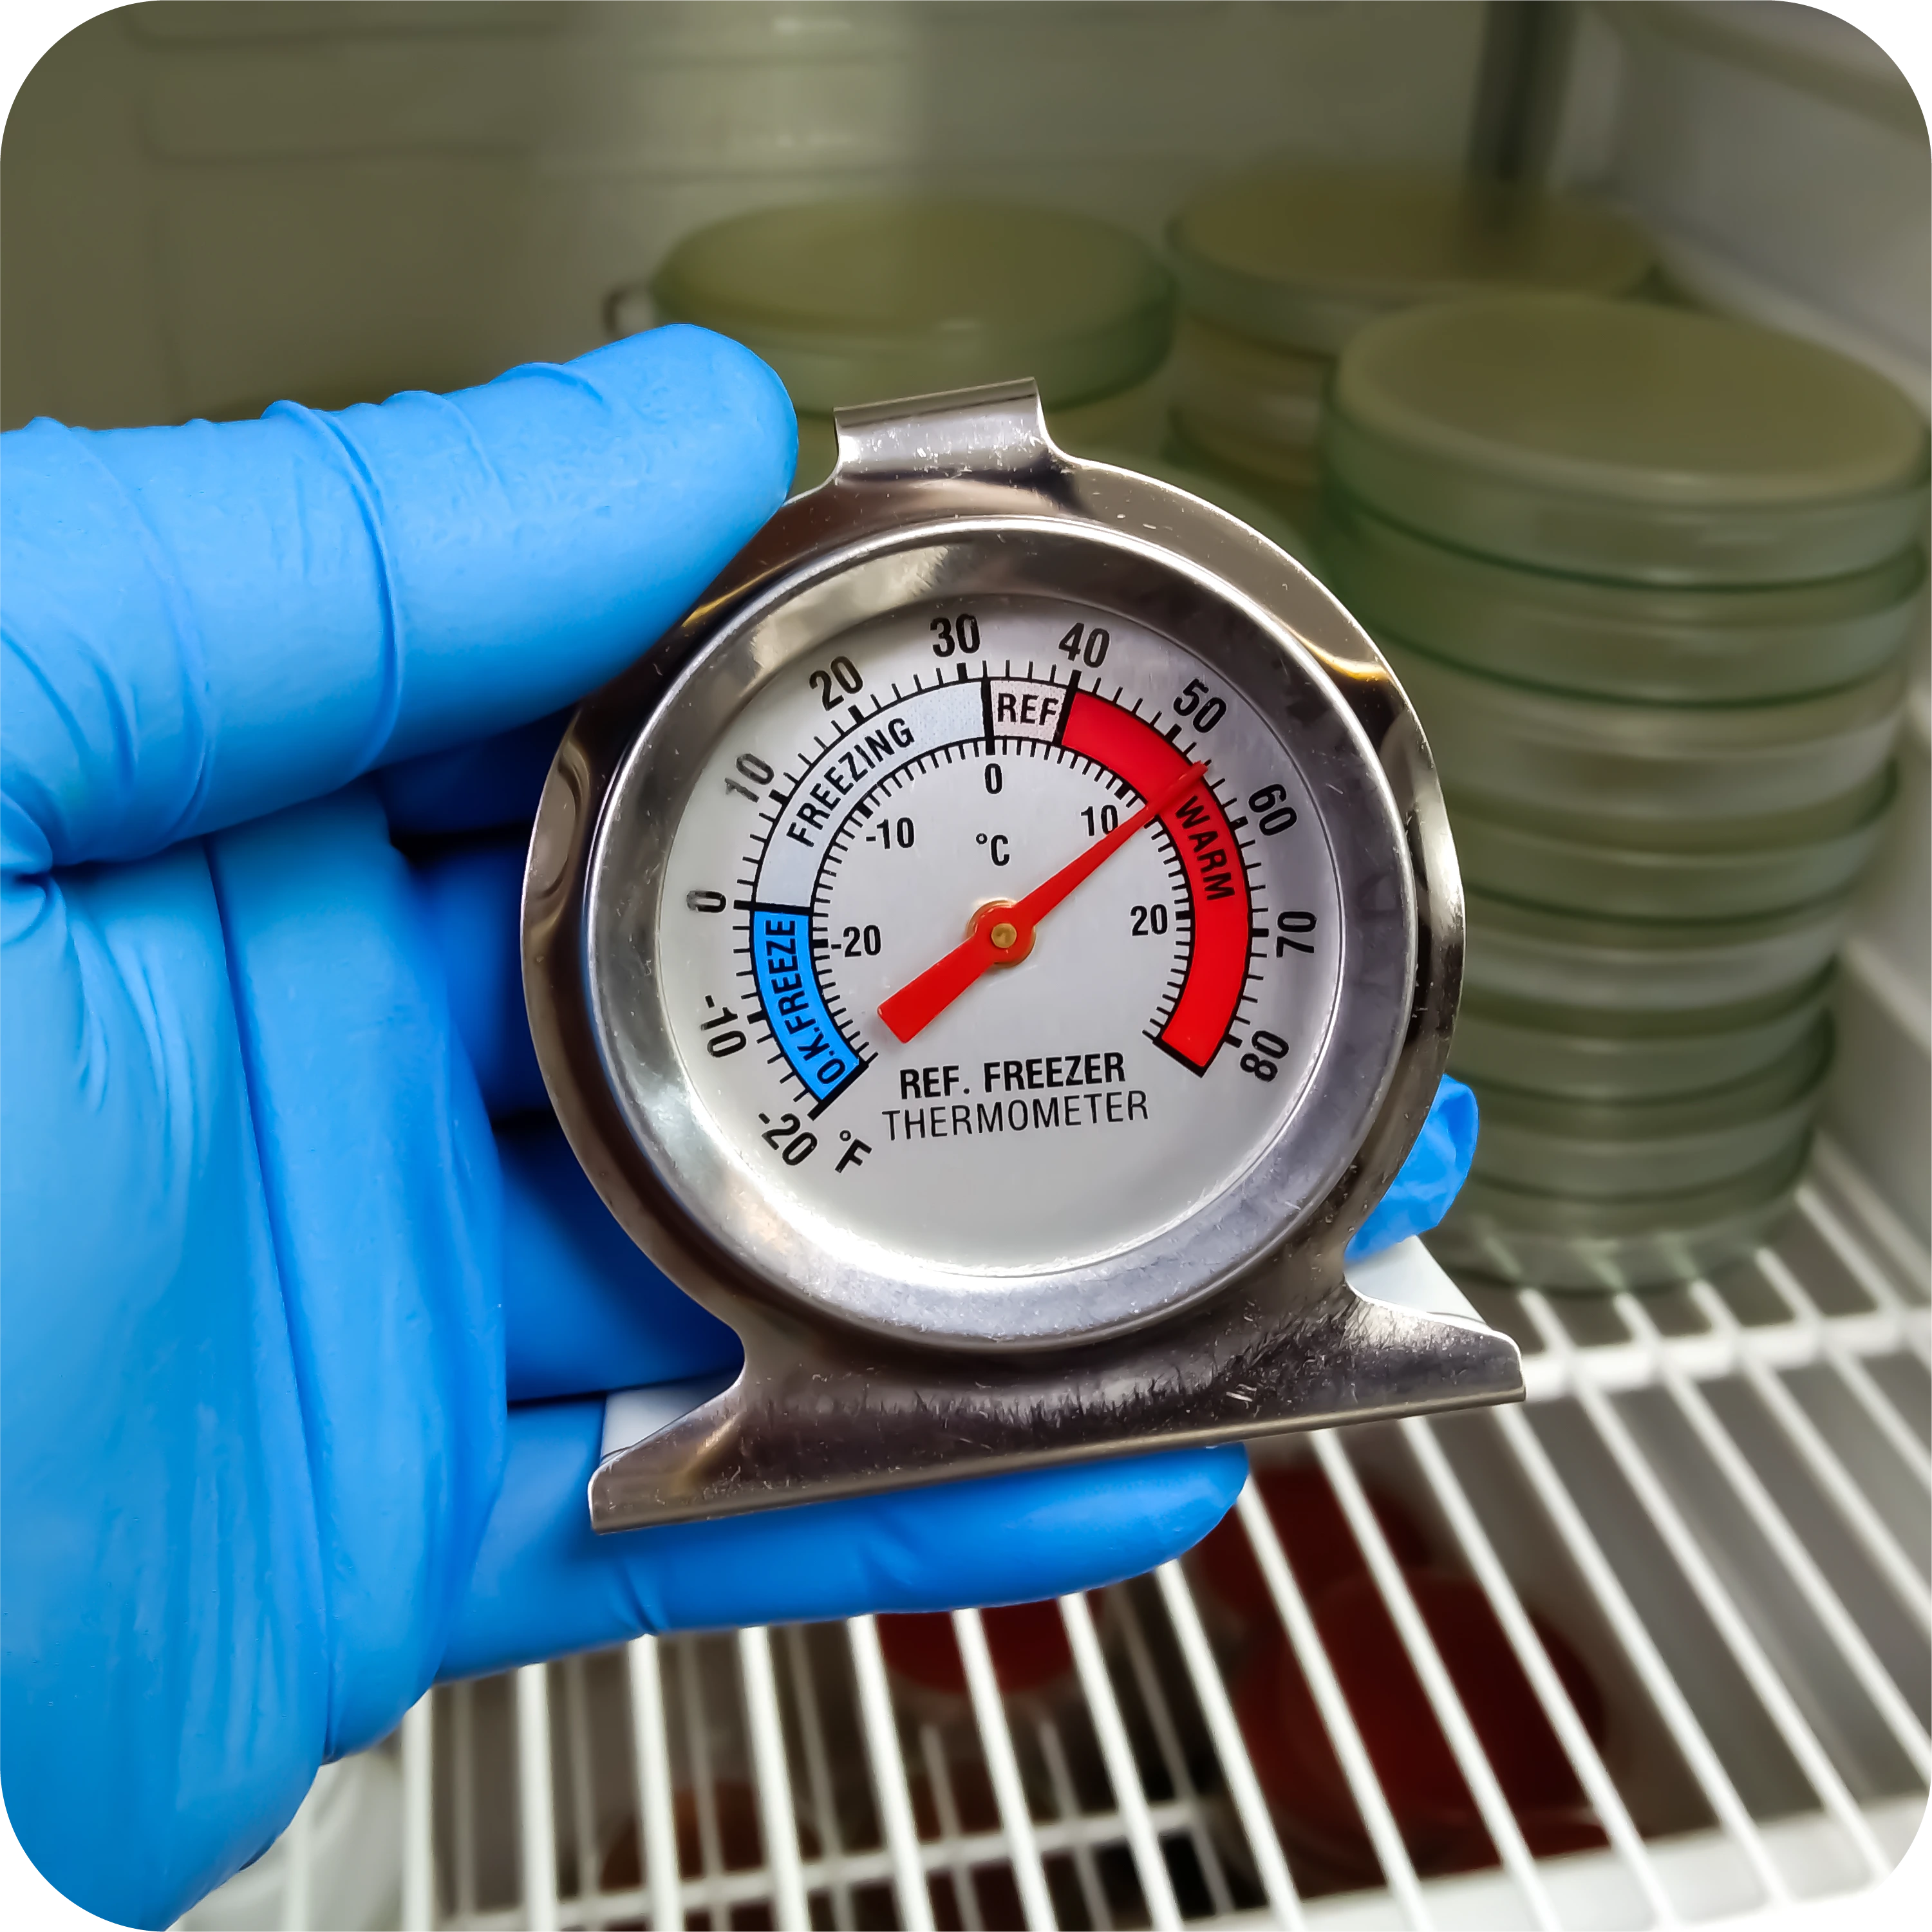 use cold chain monitoring systems to monitor the temperature of sensitive food]